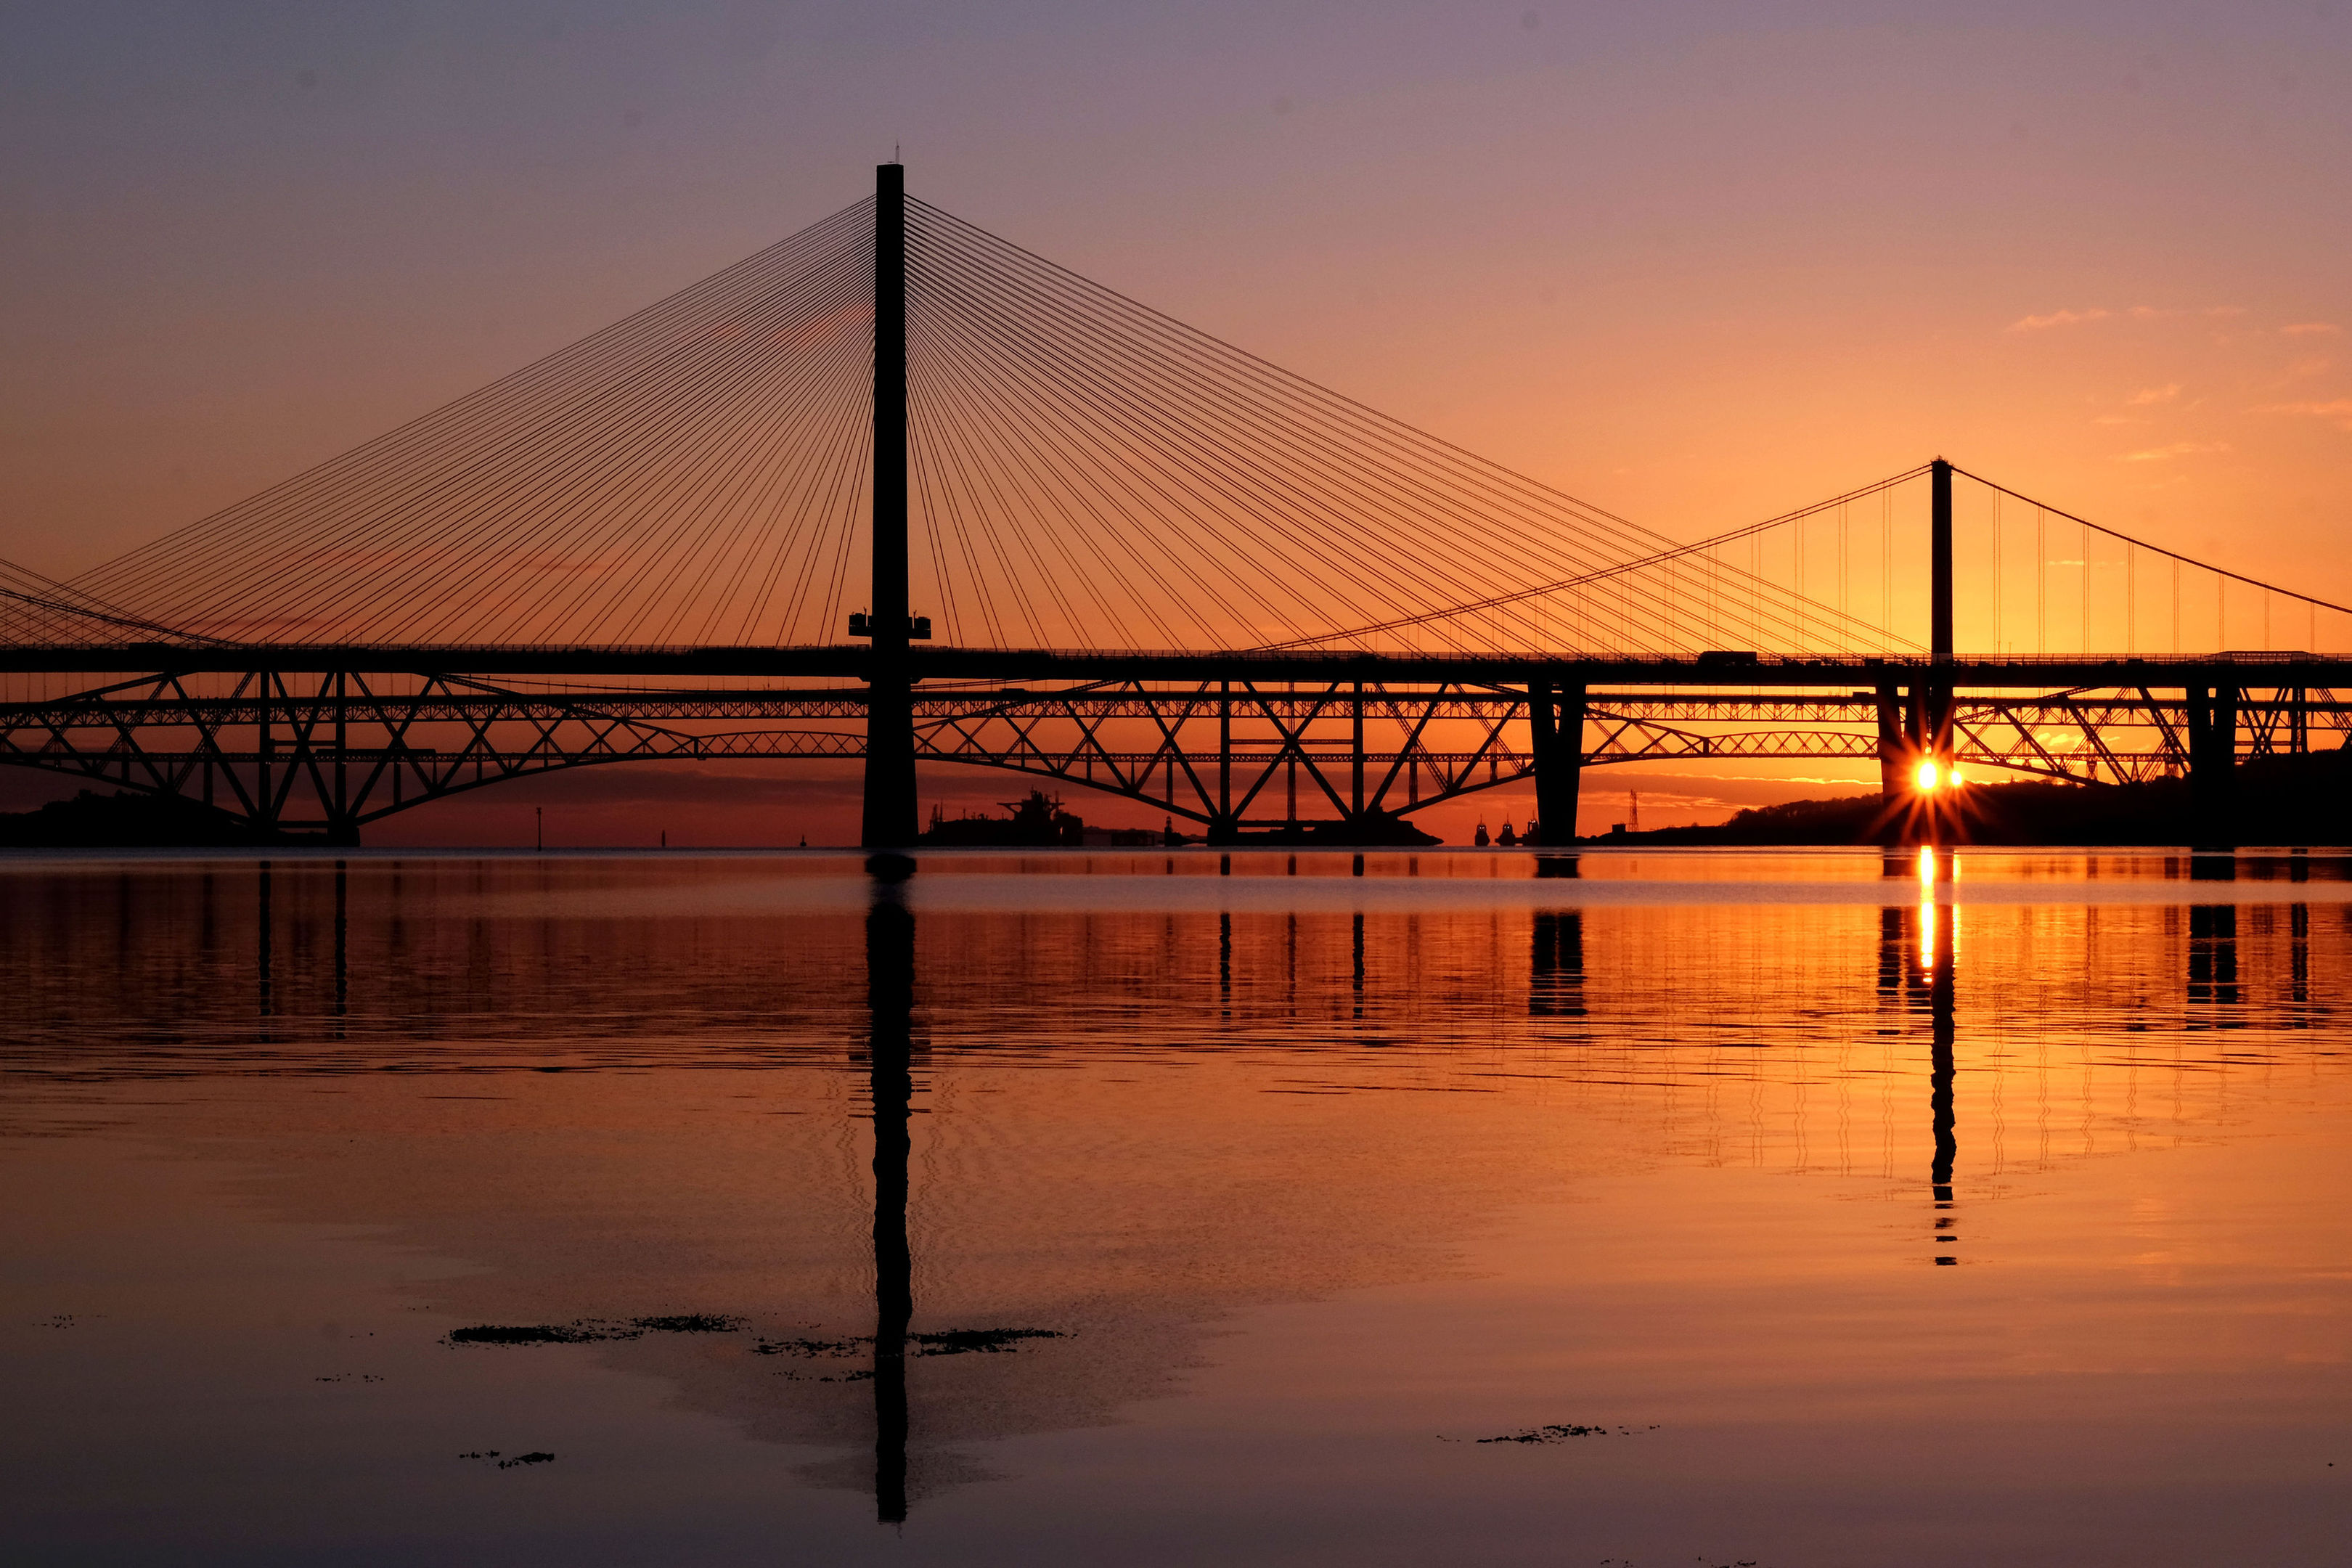 Sunrise over the Firth of Forth, South Queensferry (Jane Barlow/PA Wire)